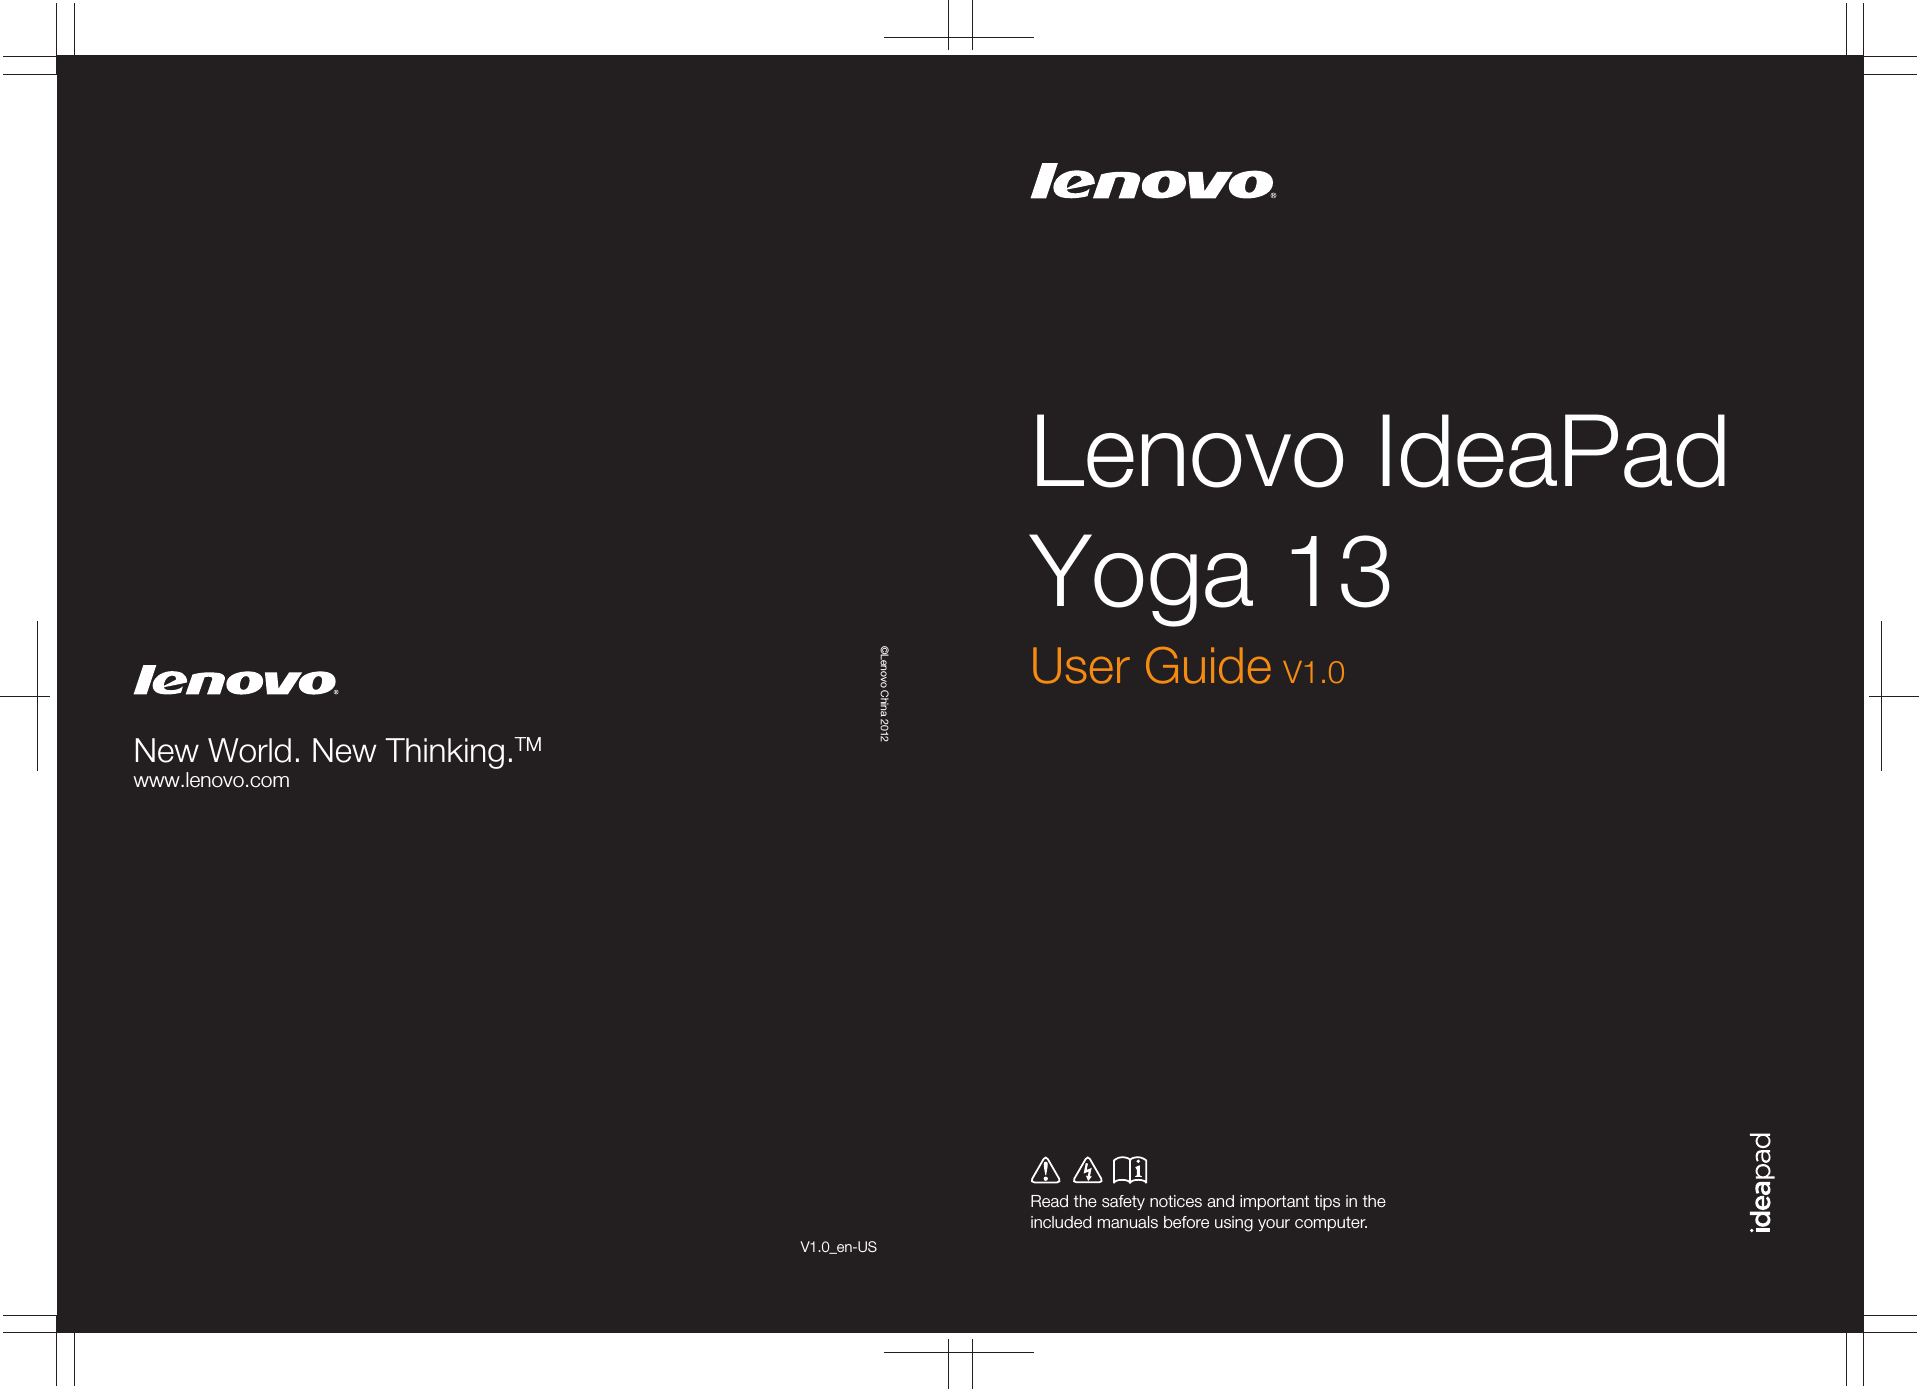 Lenovo IdeaPad Yoga 13Read the safety notices and important tips in the included manuals before using your computer.©Lenovo China 2012New World. New Thinking.TMwww.lenovo.comV1.0_en-USUser Guide V1.0